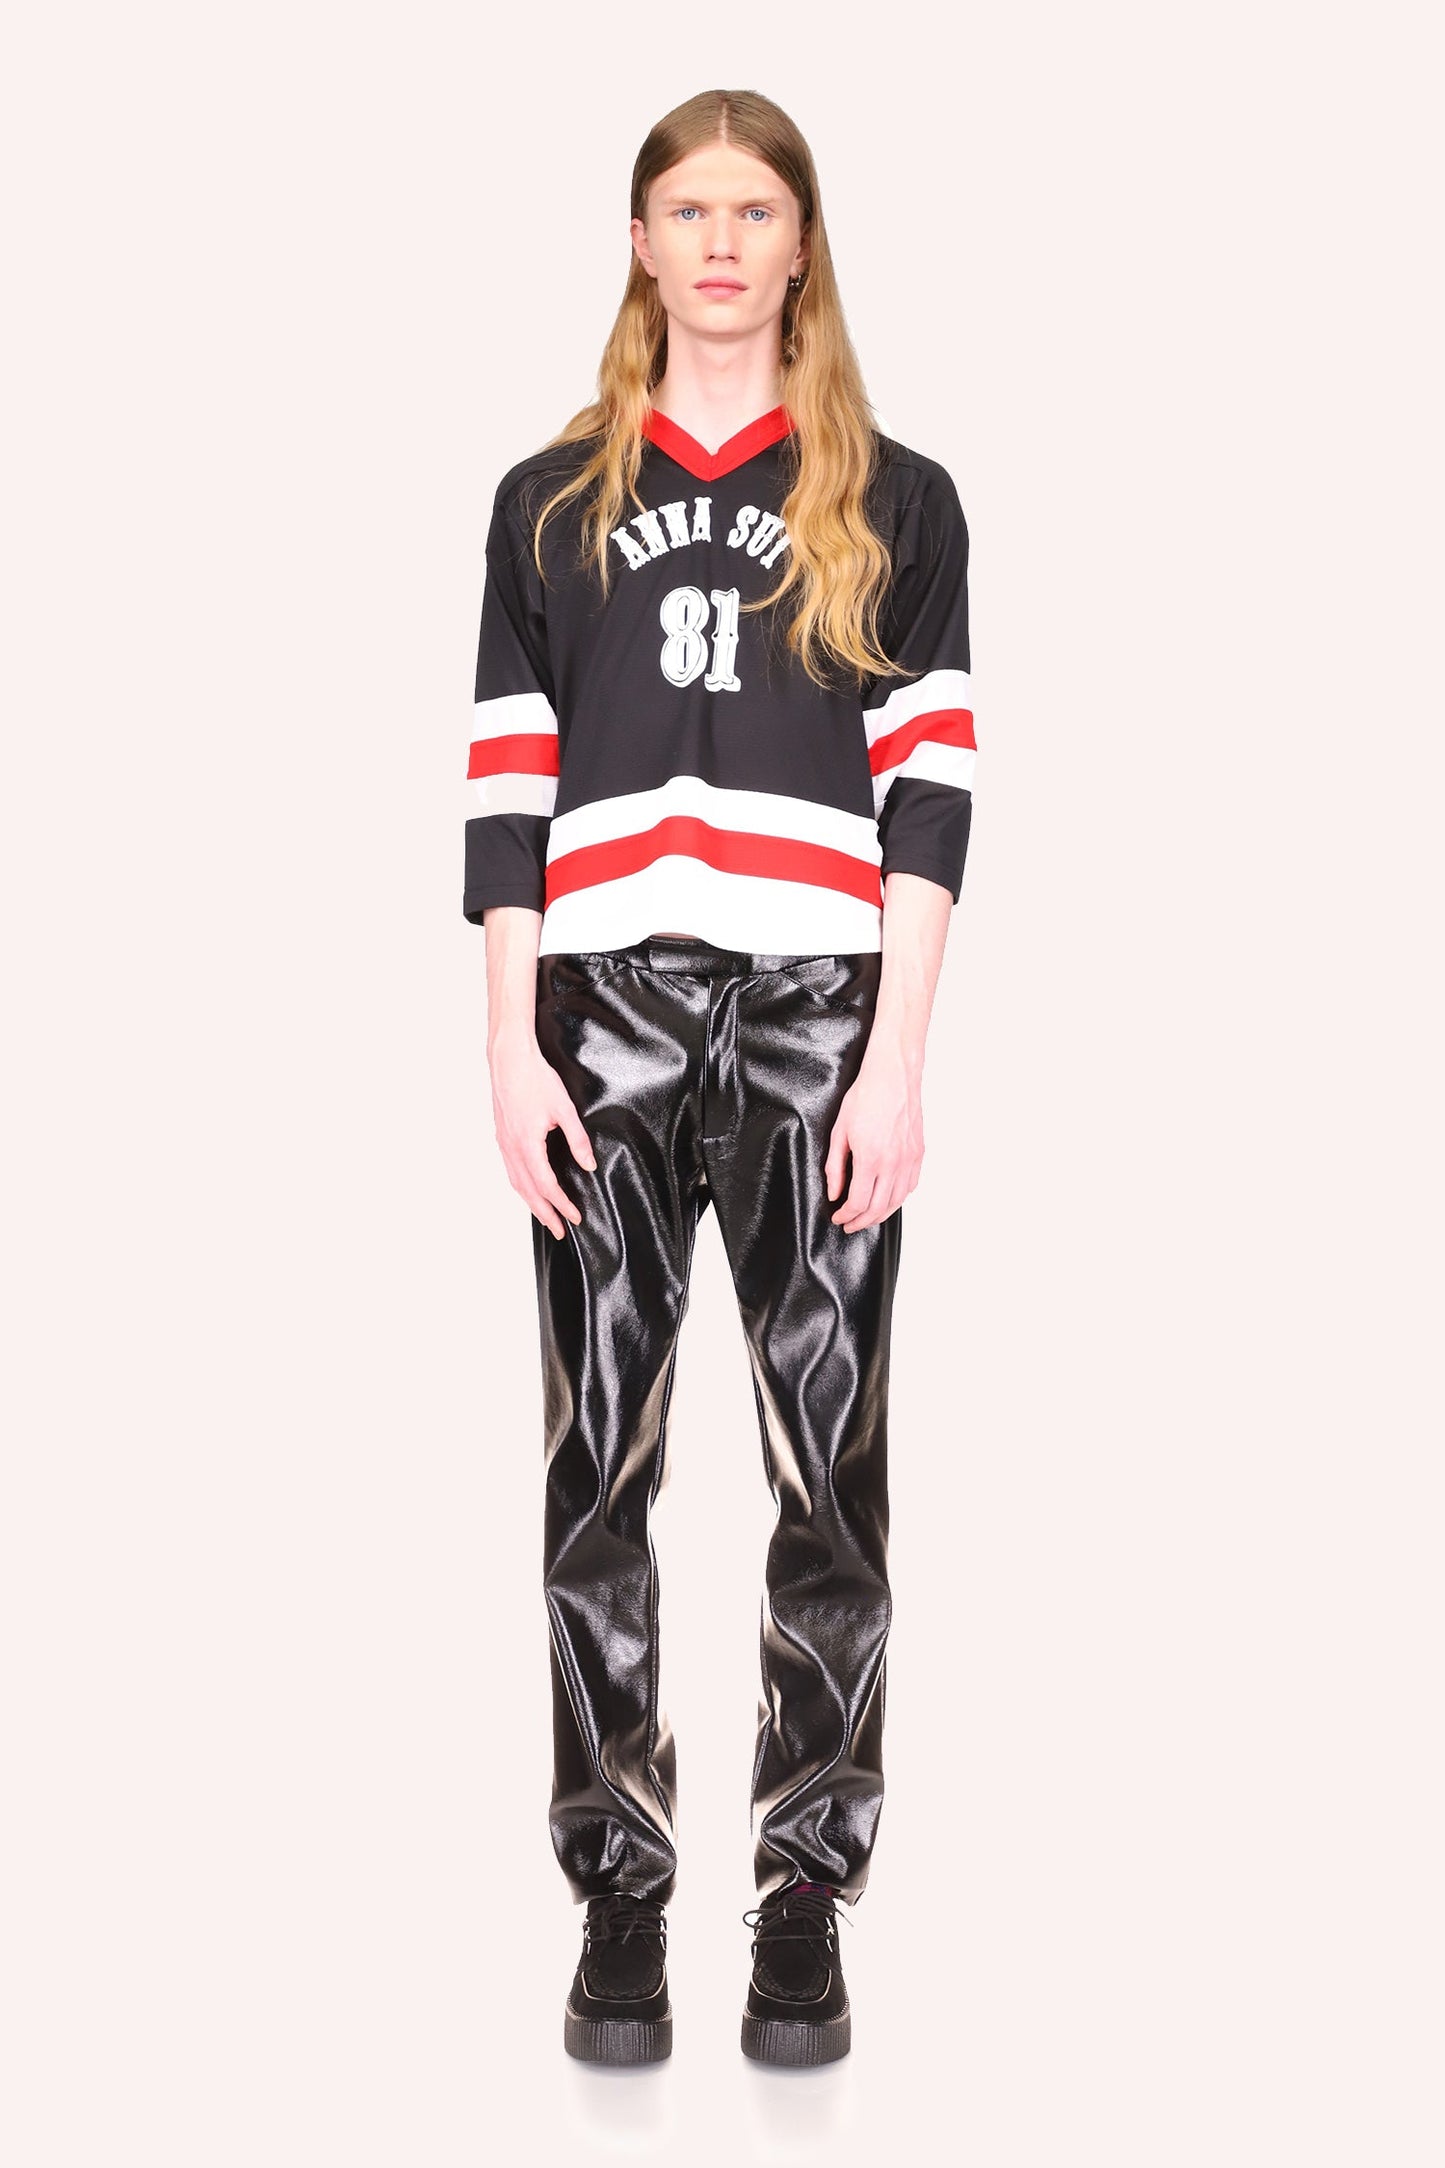 Jersey, red v-collar, black top with Anna Sui and 81 in white fonts, then stripes of white-red-white